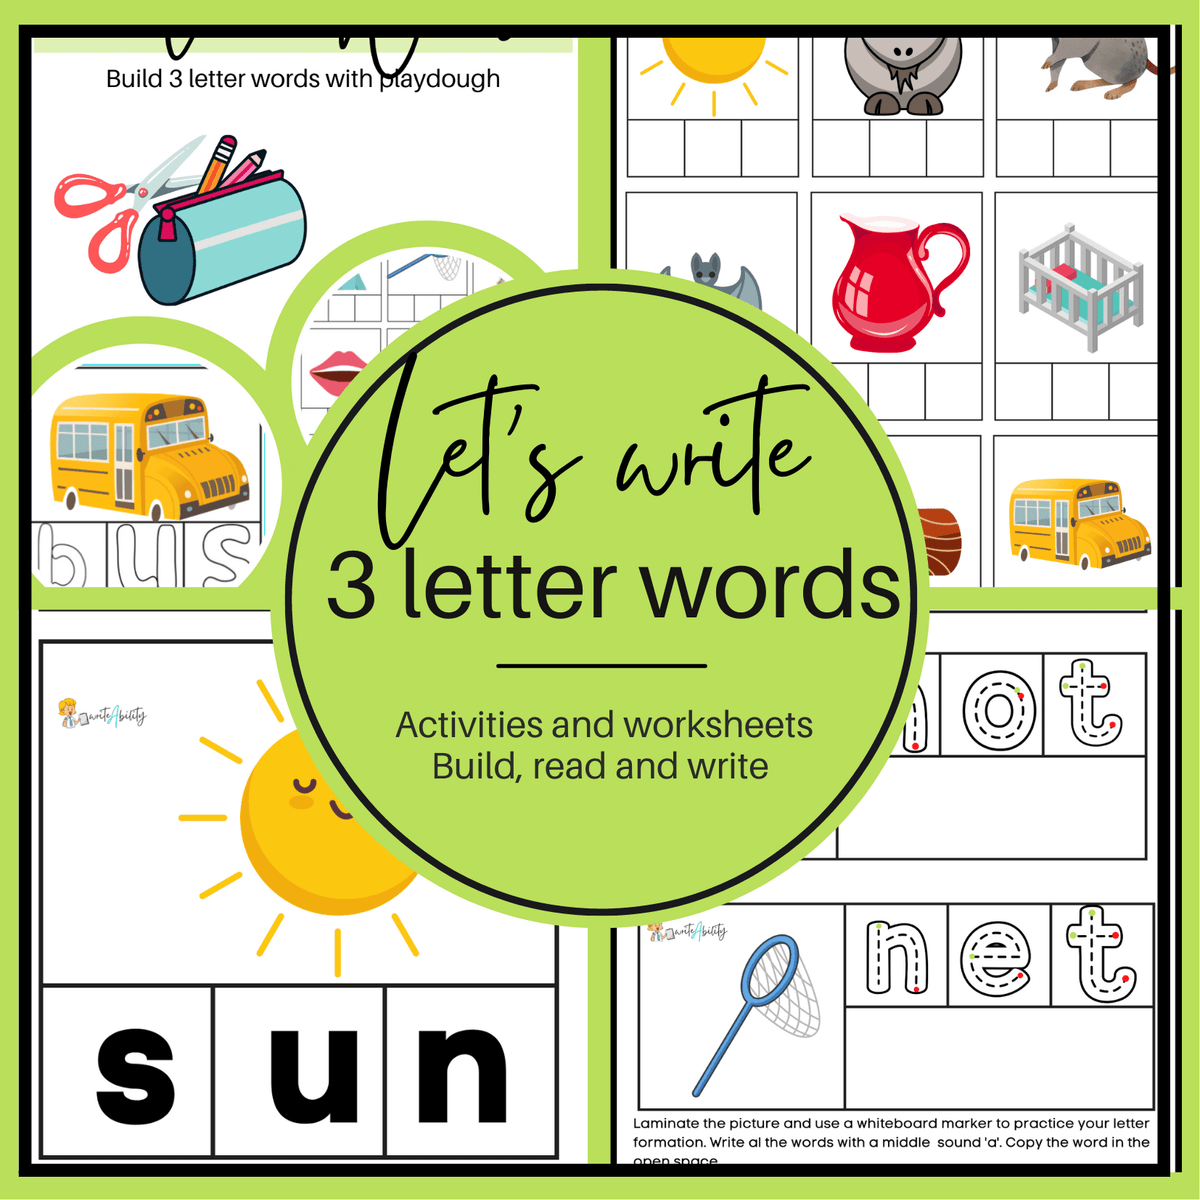 Let's Write 3 Letter Words-Activities and Worksheets– WriteAbility